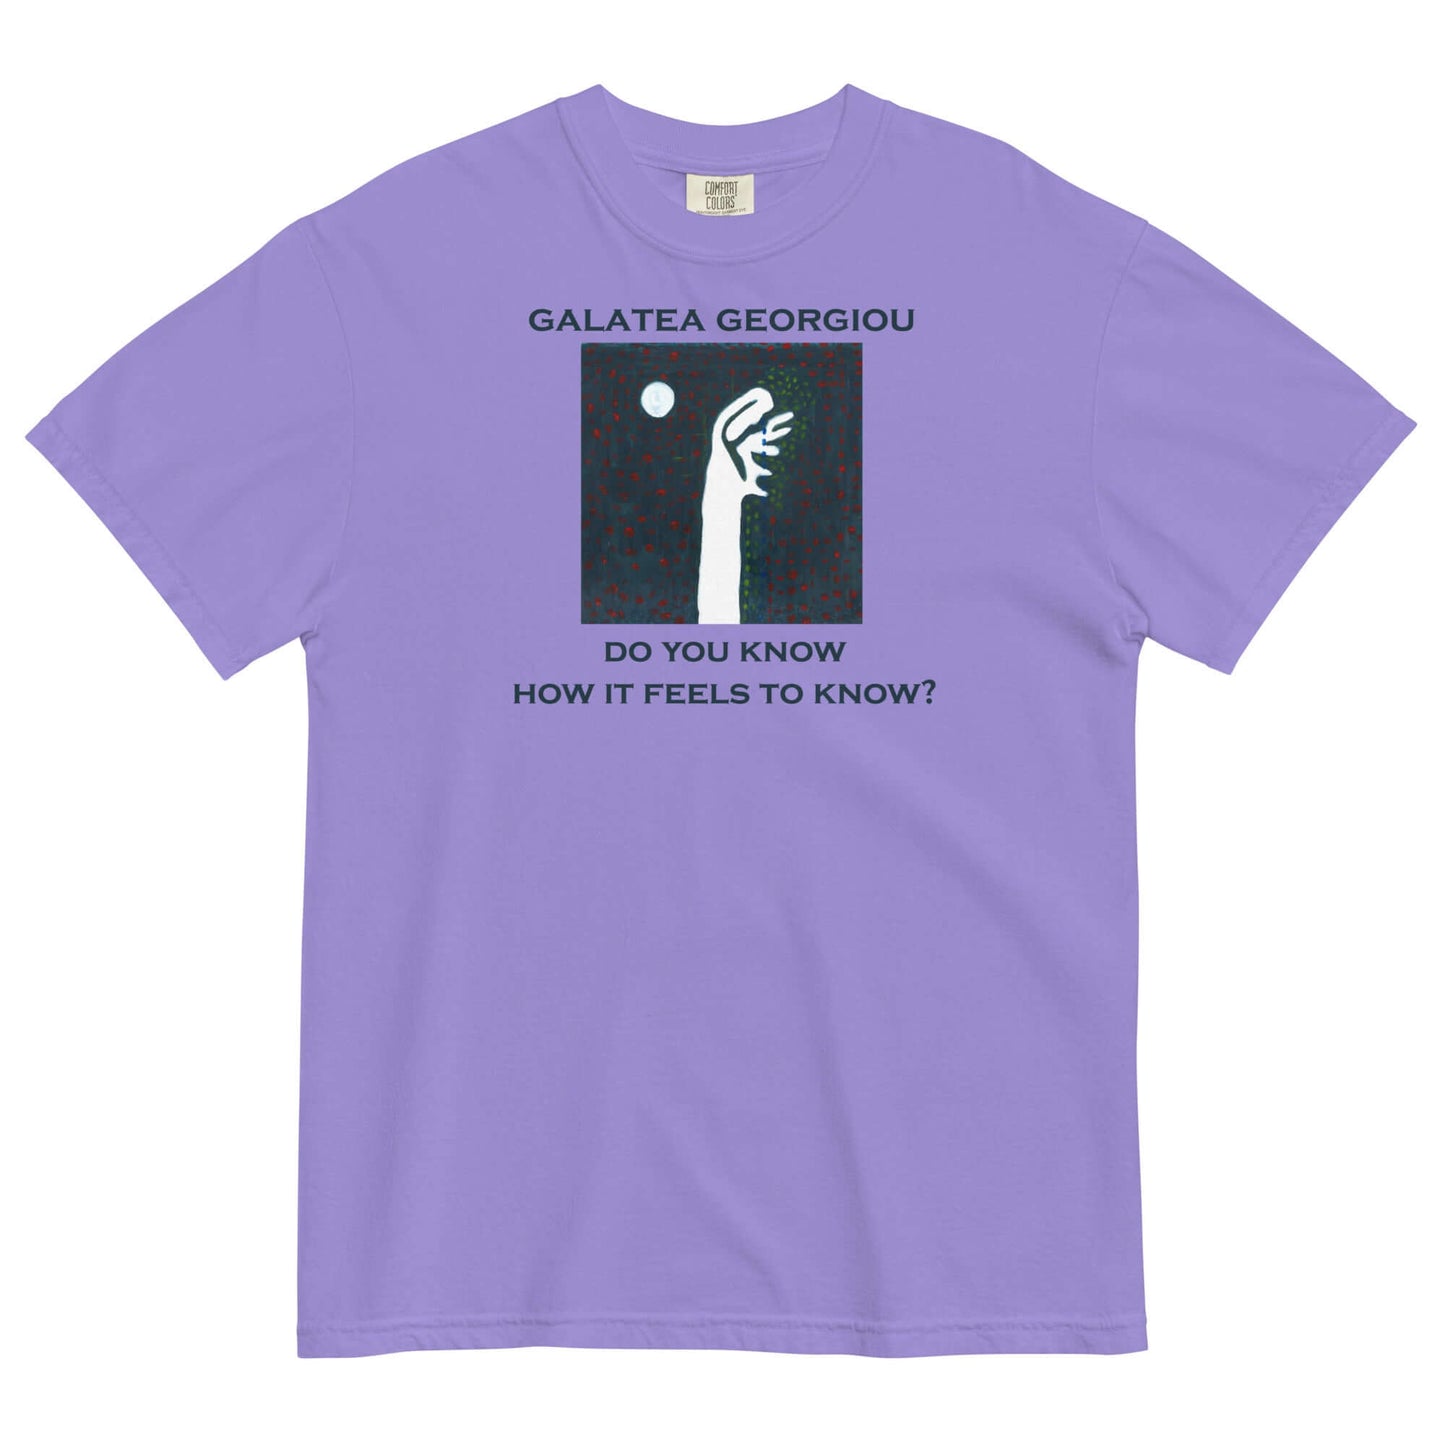 How it Feels to Know - Unisex garment-dyed heavyweight t-shirt